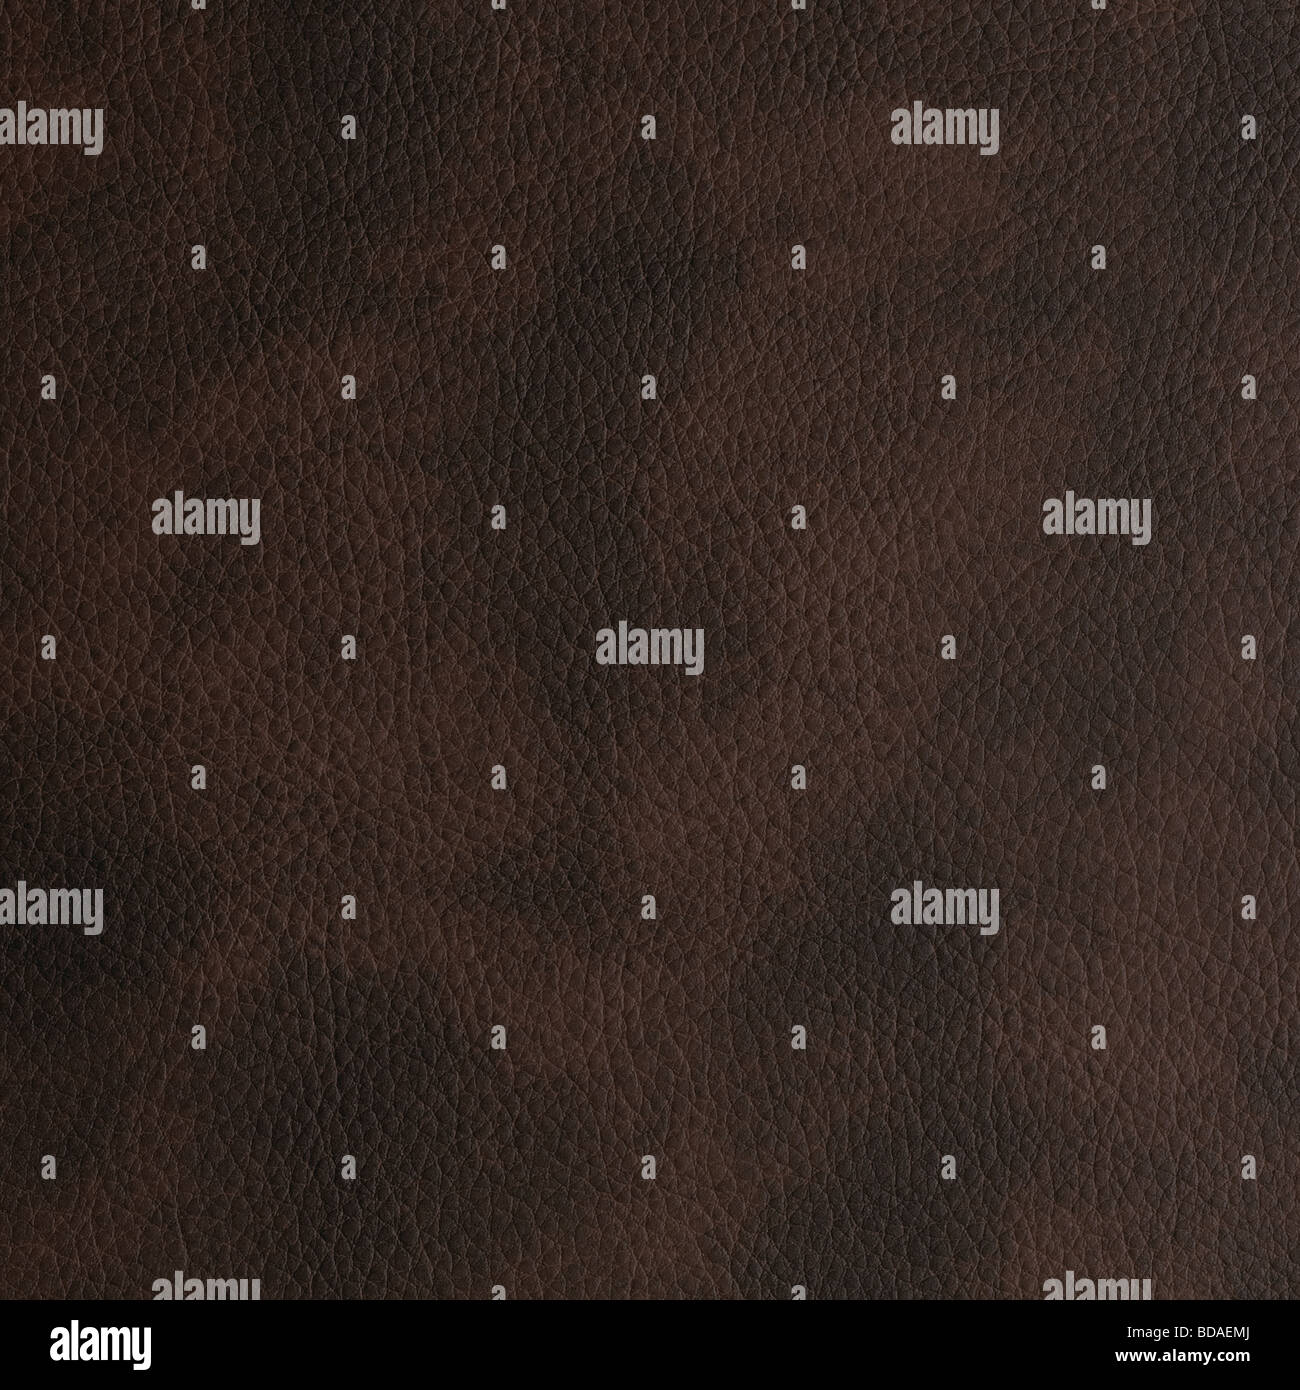 BROWN LEATHER BACKGROUND Stock Photo